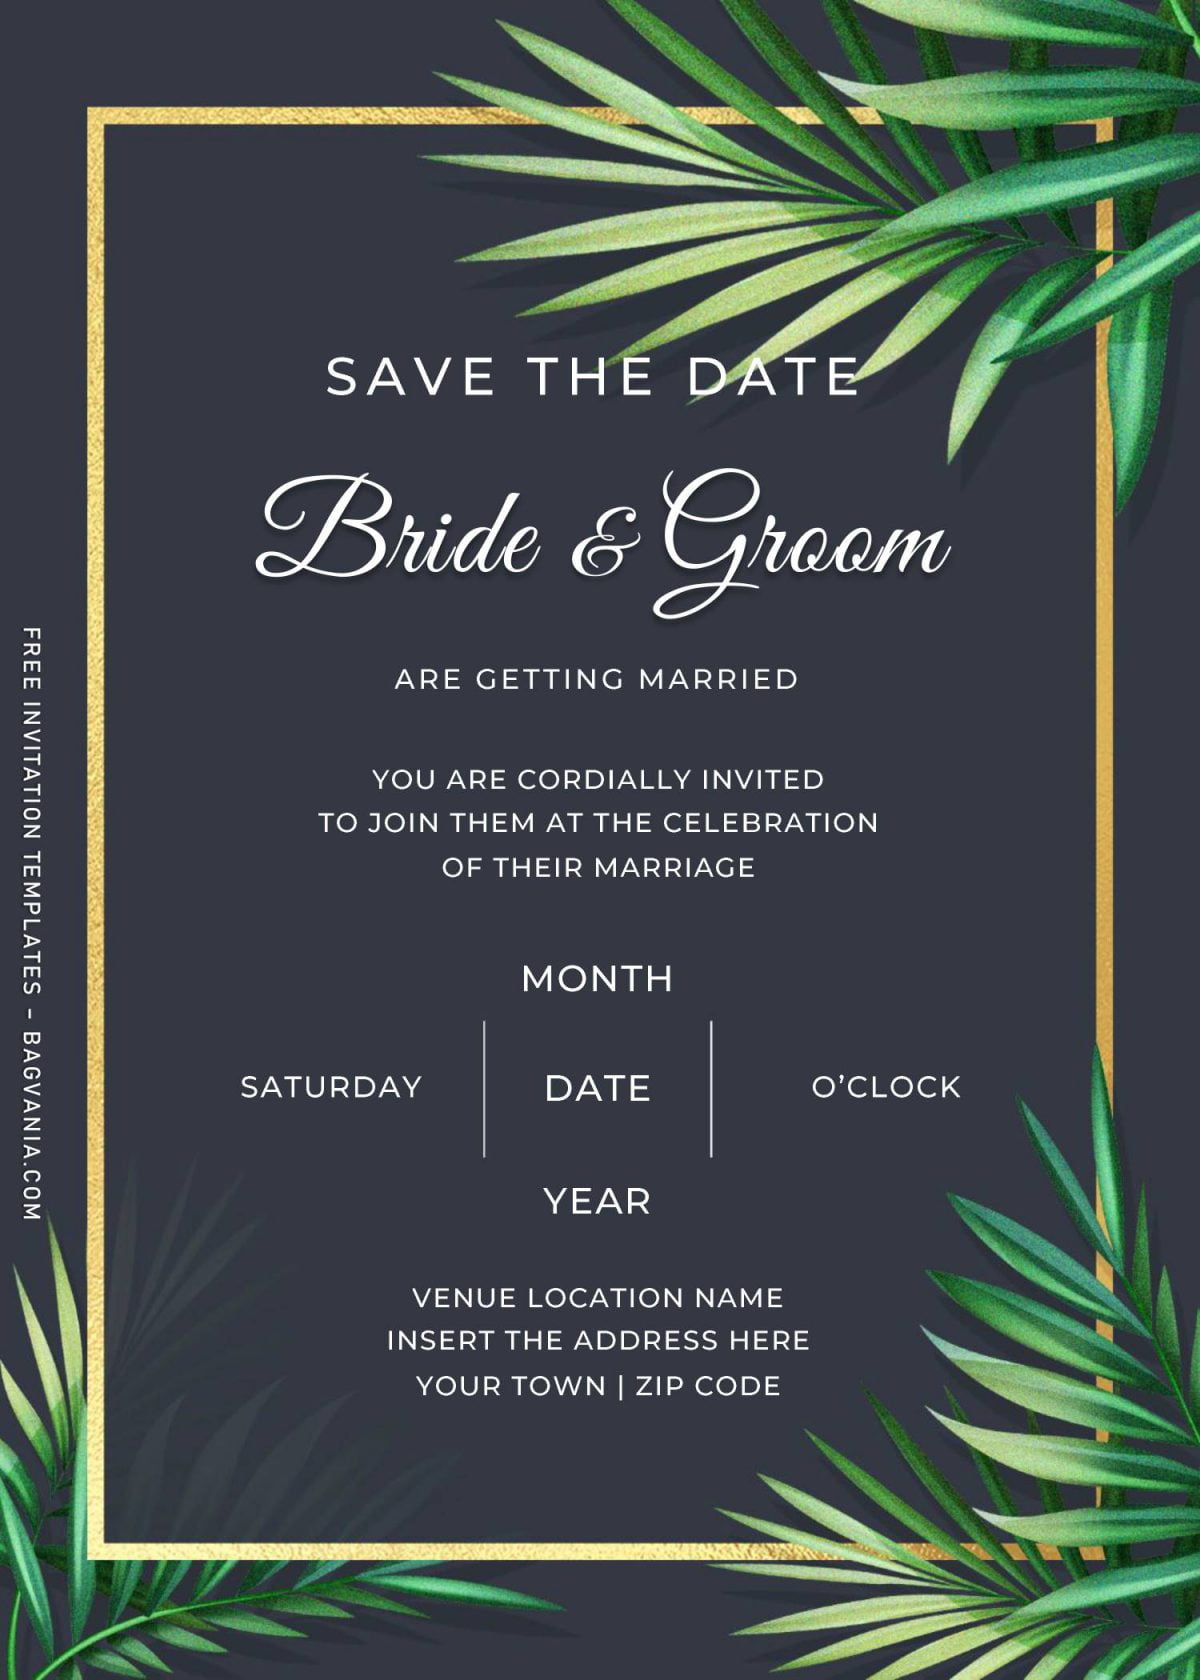 Free Greenery Wedding Invitation Templates For Word and has exotic and elegant design